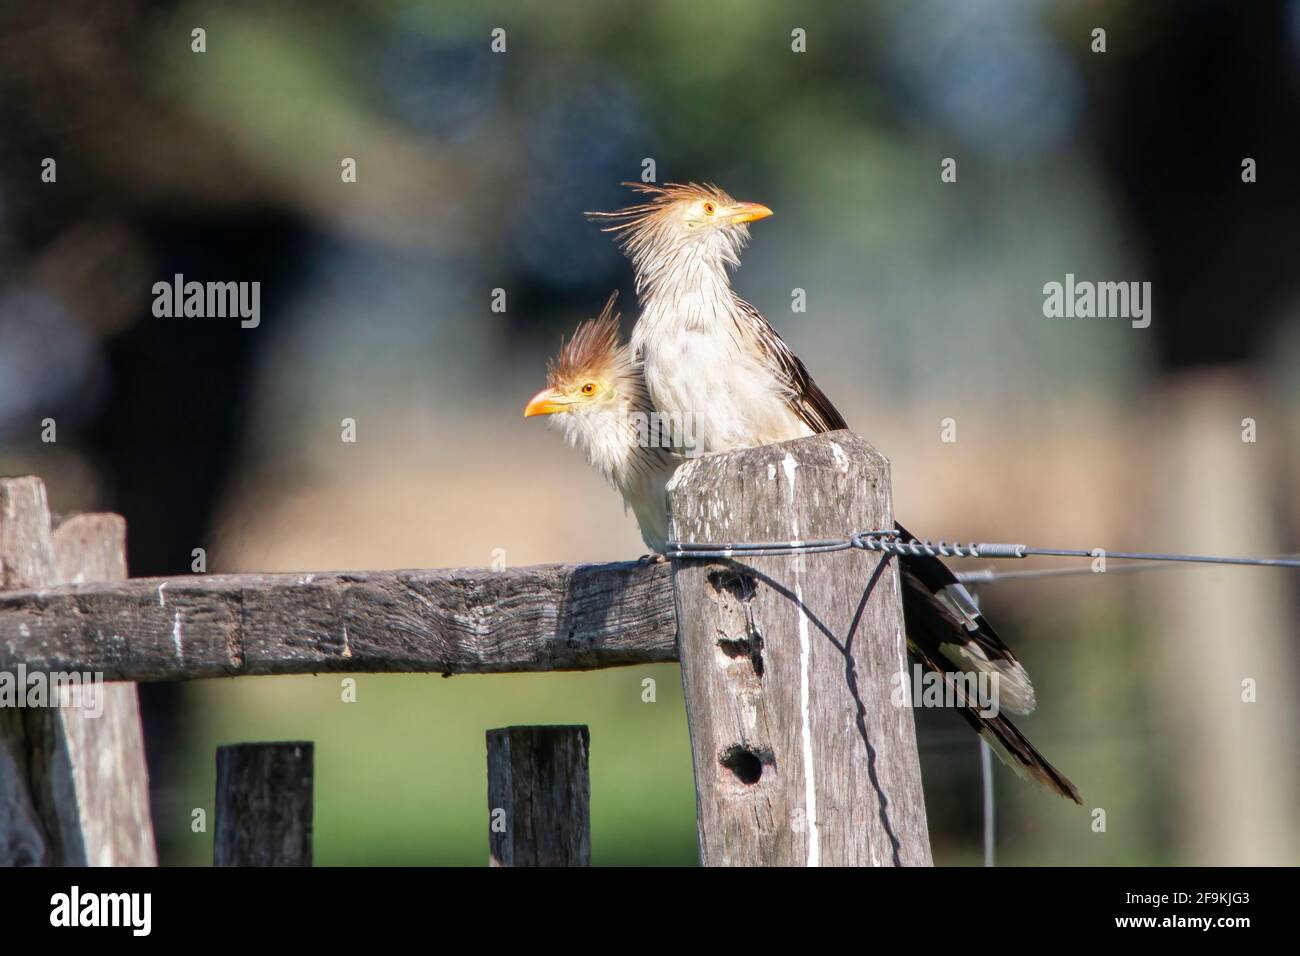 guira cuckoo, Guira guira, adult perched on wooden fence, Montevideo, Uruguay Stock Photo